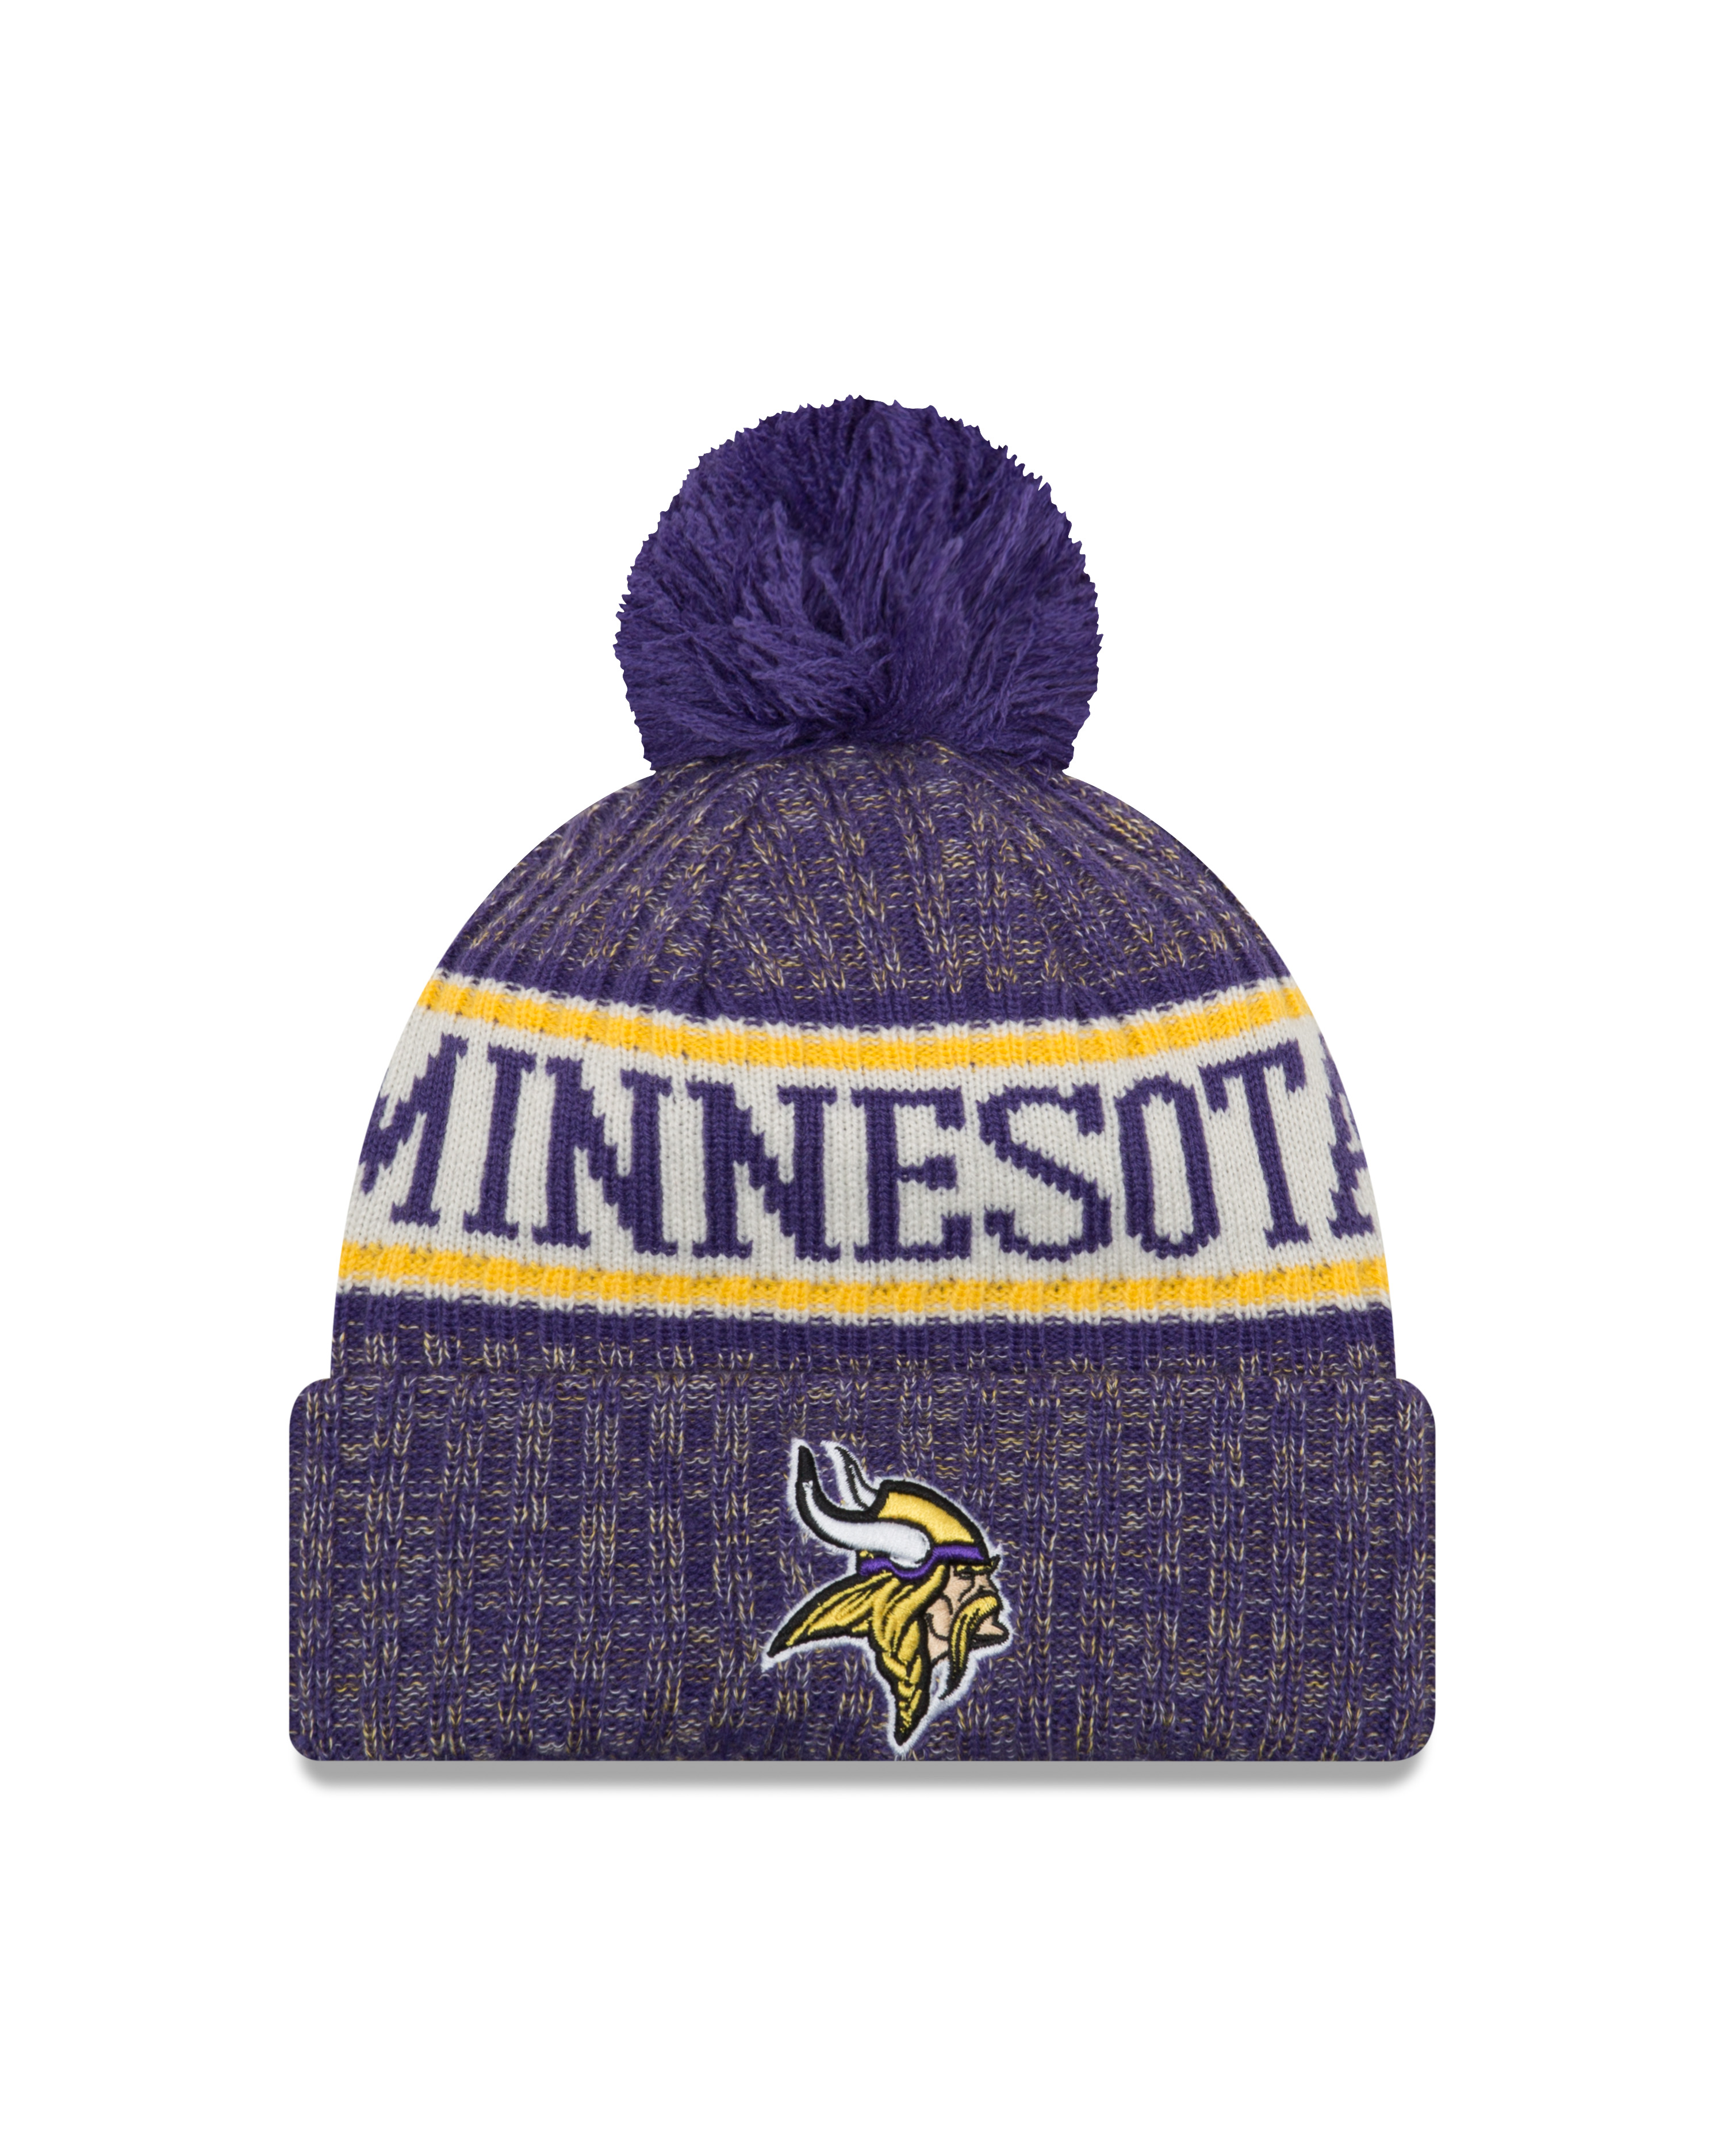 New Era Official NFL Cold Weather Collection #44